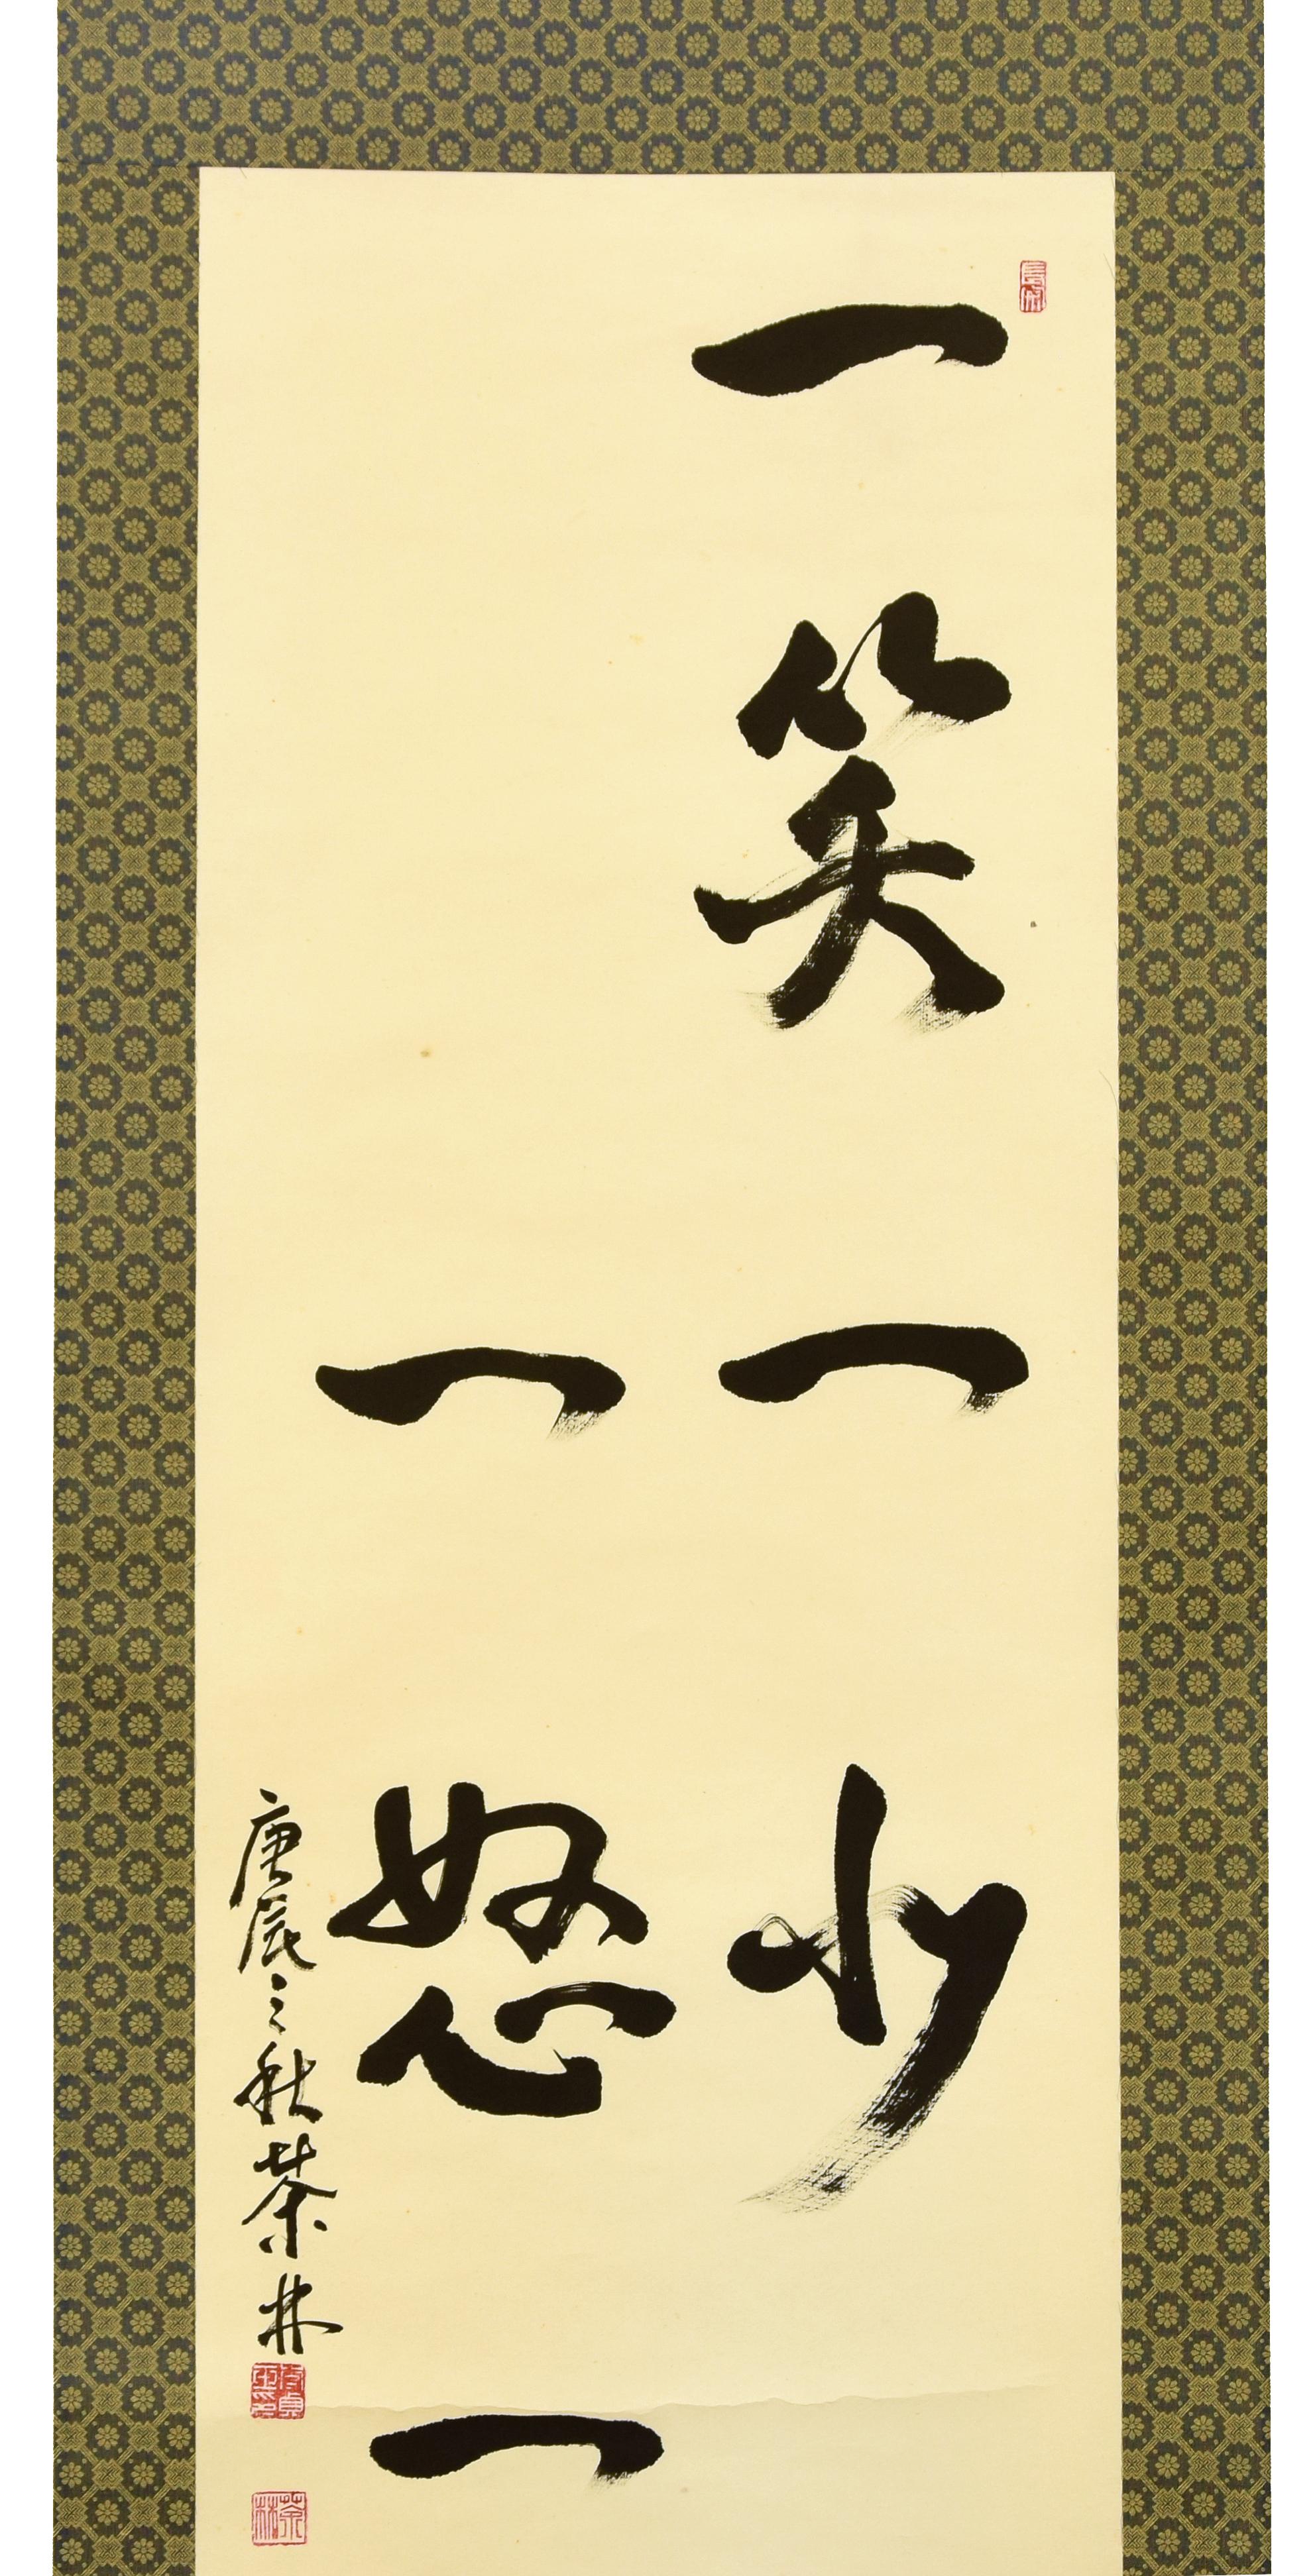 Yi Xiao Yi Shao, Yi Nu Yi Lao is a beautiful artistic calligraphy in China ink on Xuan paper realized by the Chinese artist Li Zhen in 1940.

Image dimensions: 152x44 cm.

The year and place of creation 